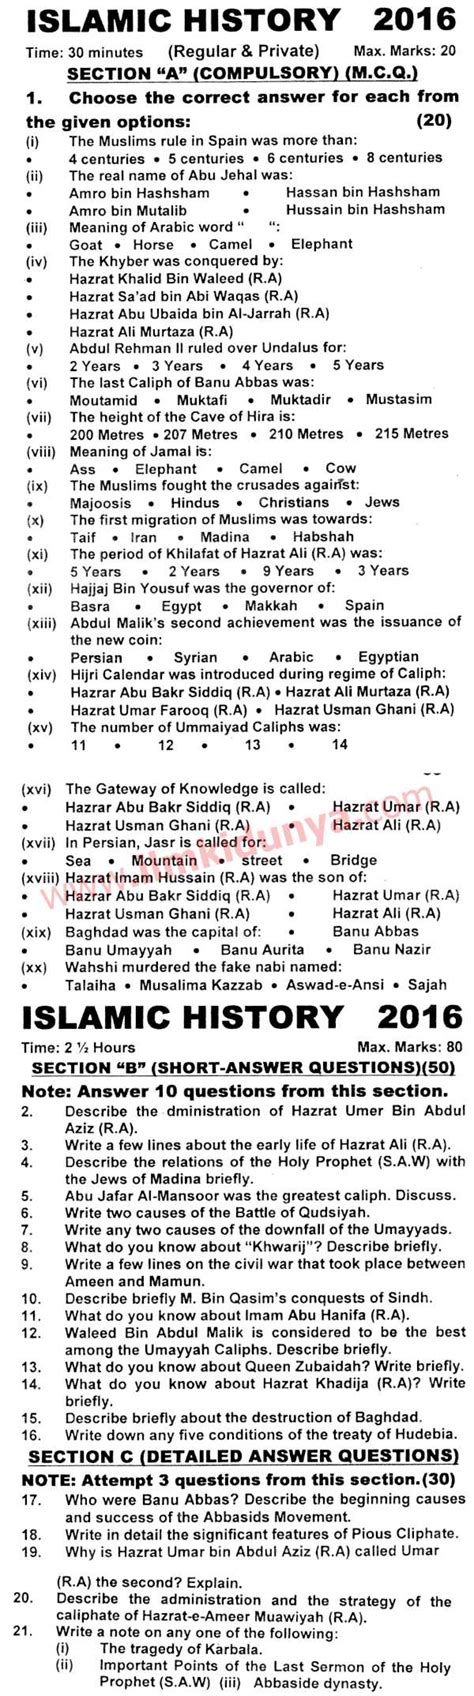 Past Papers Karachi Board Th Class Islamic History Objective And Subjective English Medium